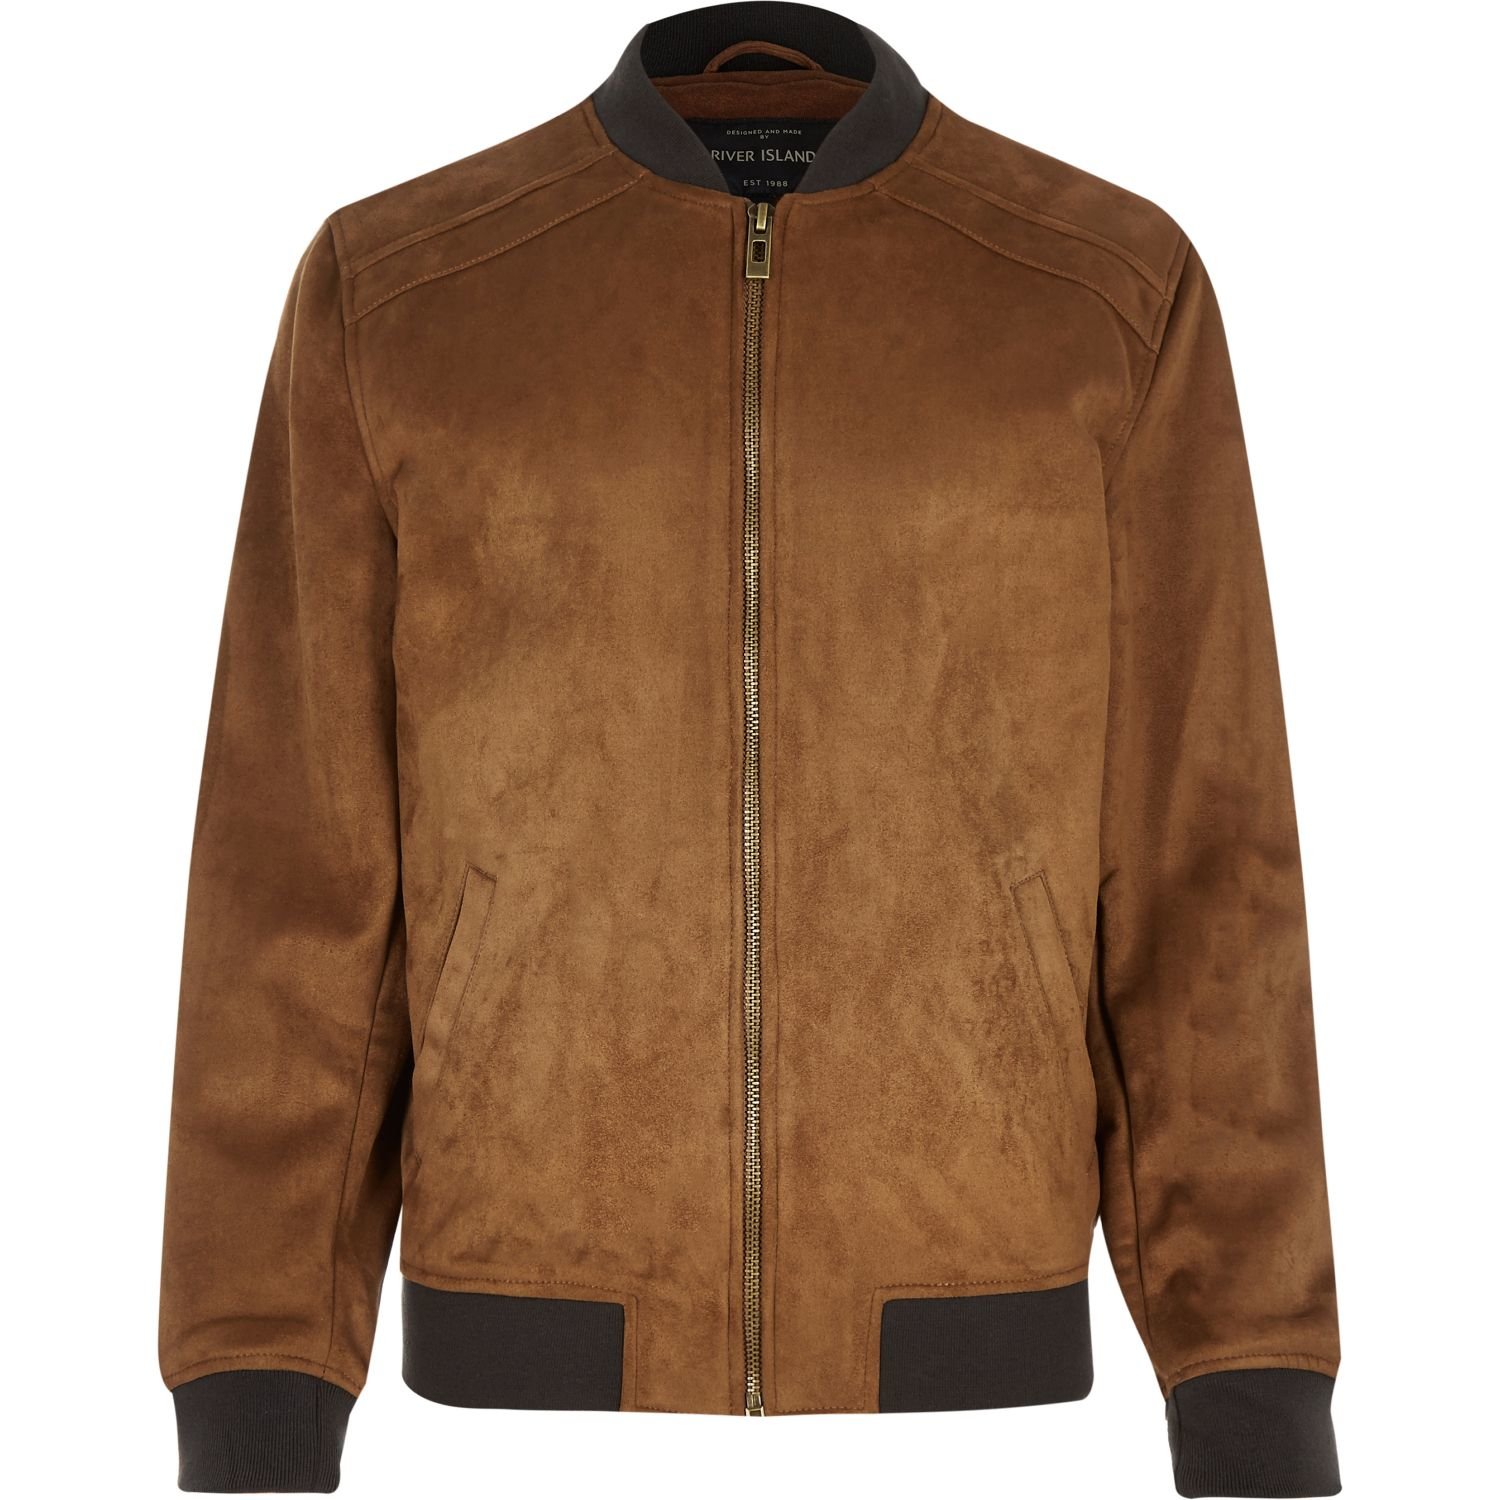 Lyst - River Island Brown Faux Suede Jacket in Brown for Men